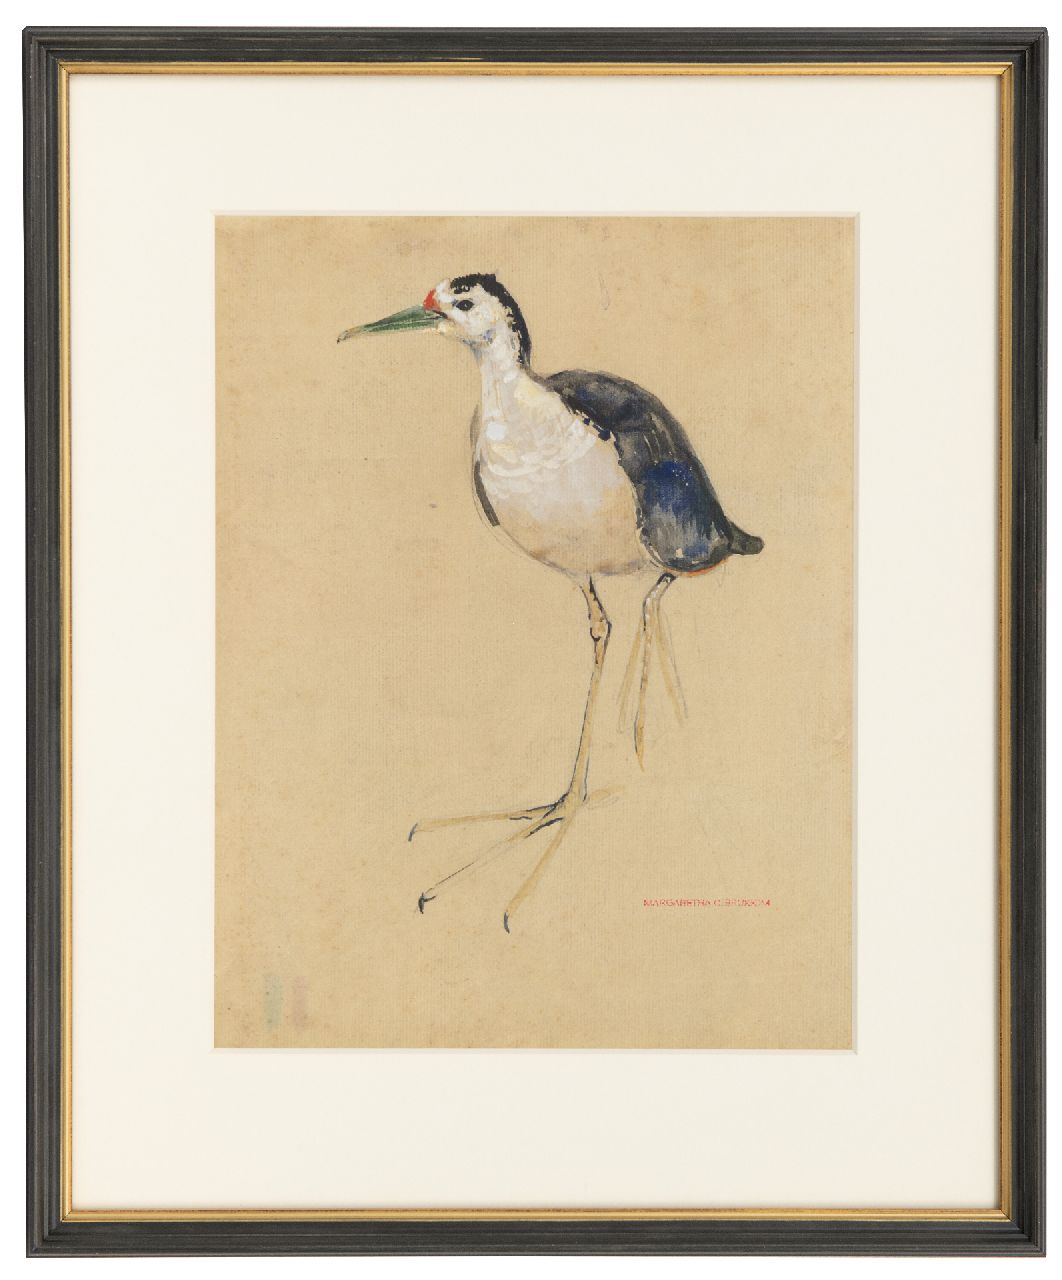 Bruigom M.C.  | Margaretha Cornelia 'Greta' Bruigom, A wader, watercolour and stamping ink on paper 31.3 x 24.6 cm, signed l.r. with the artists stamp